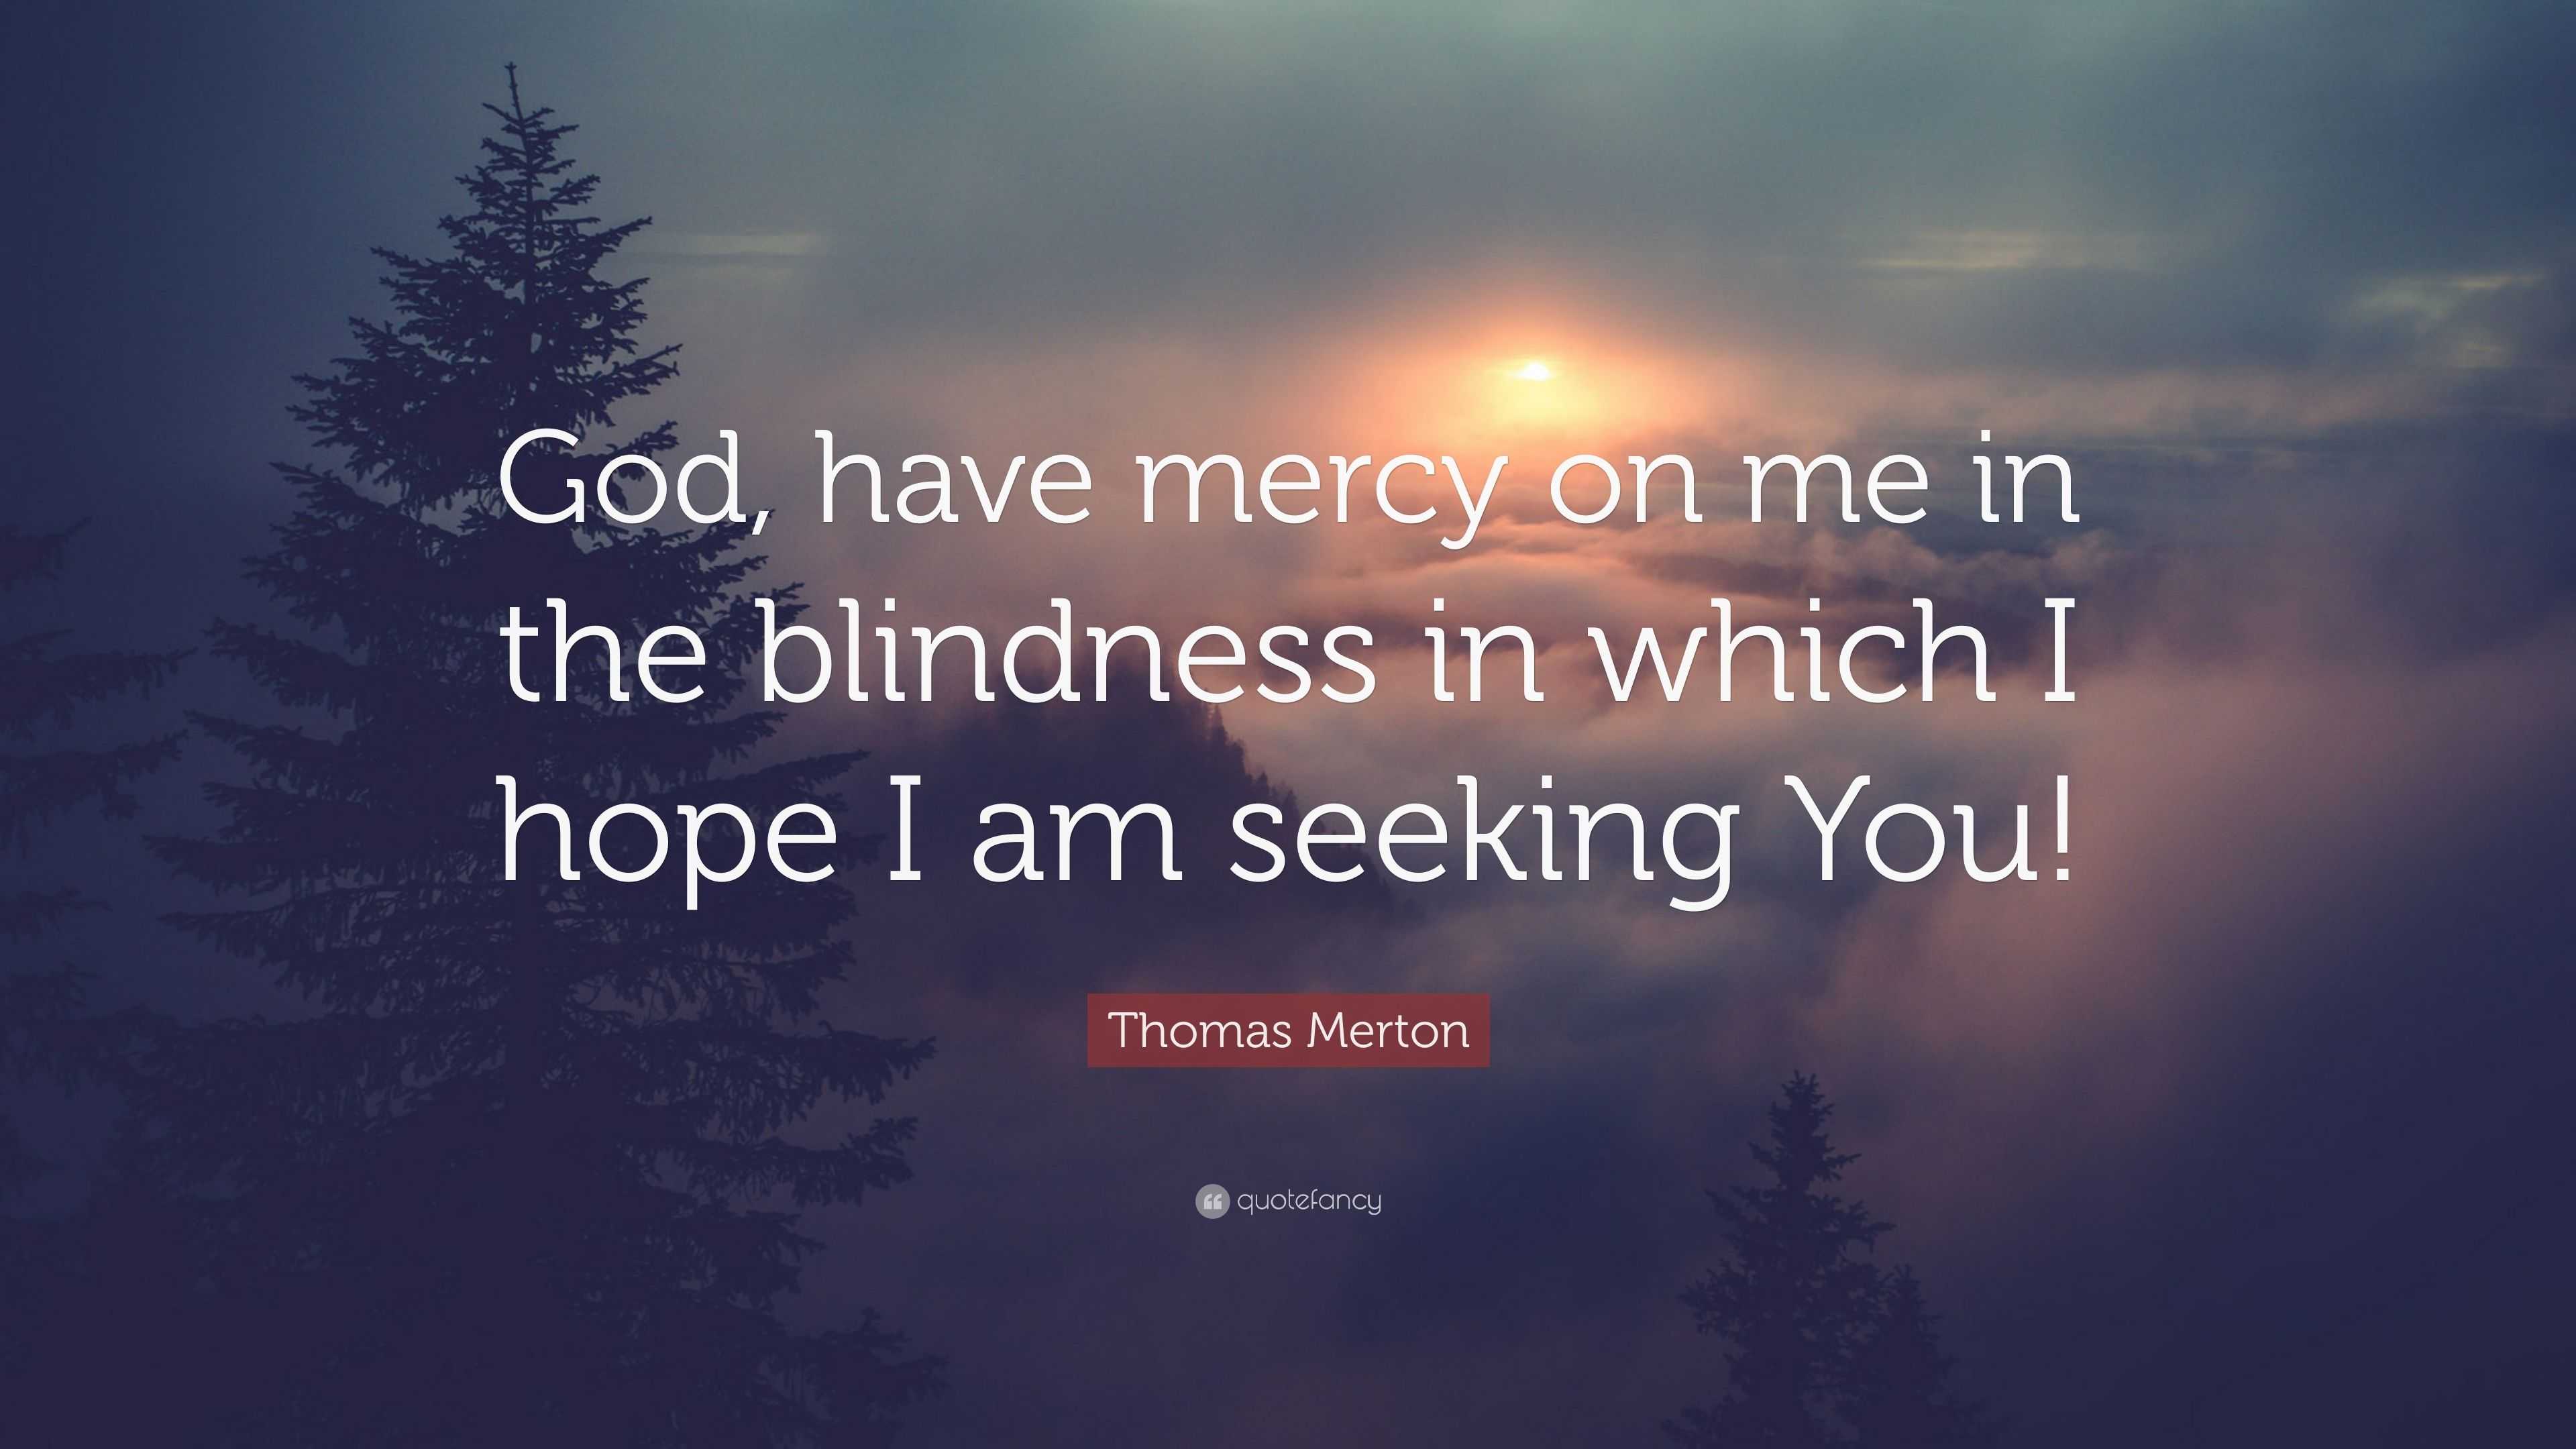 Thomas Merton Quote: “God, have mercy on me in the blindness in which I ...